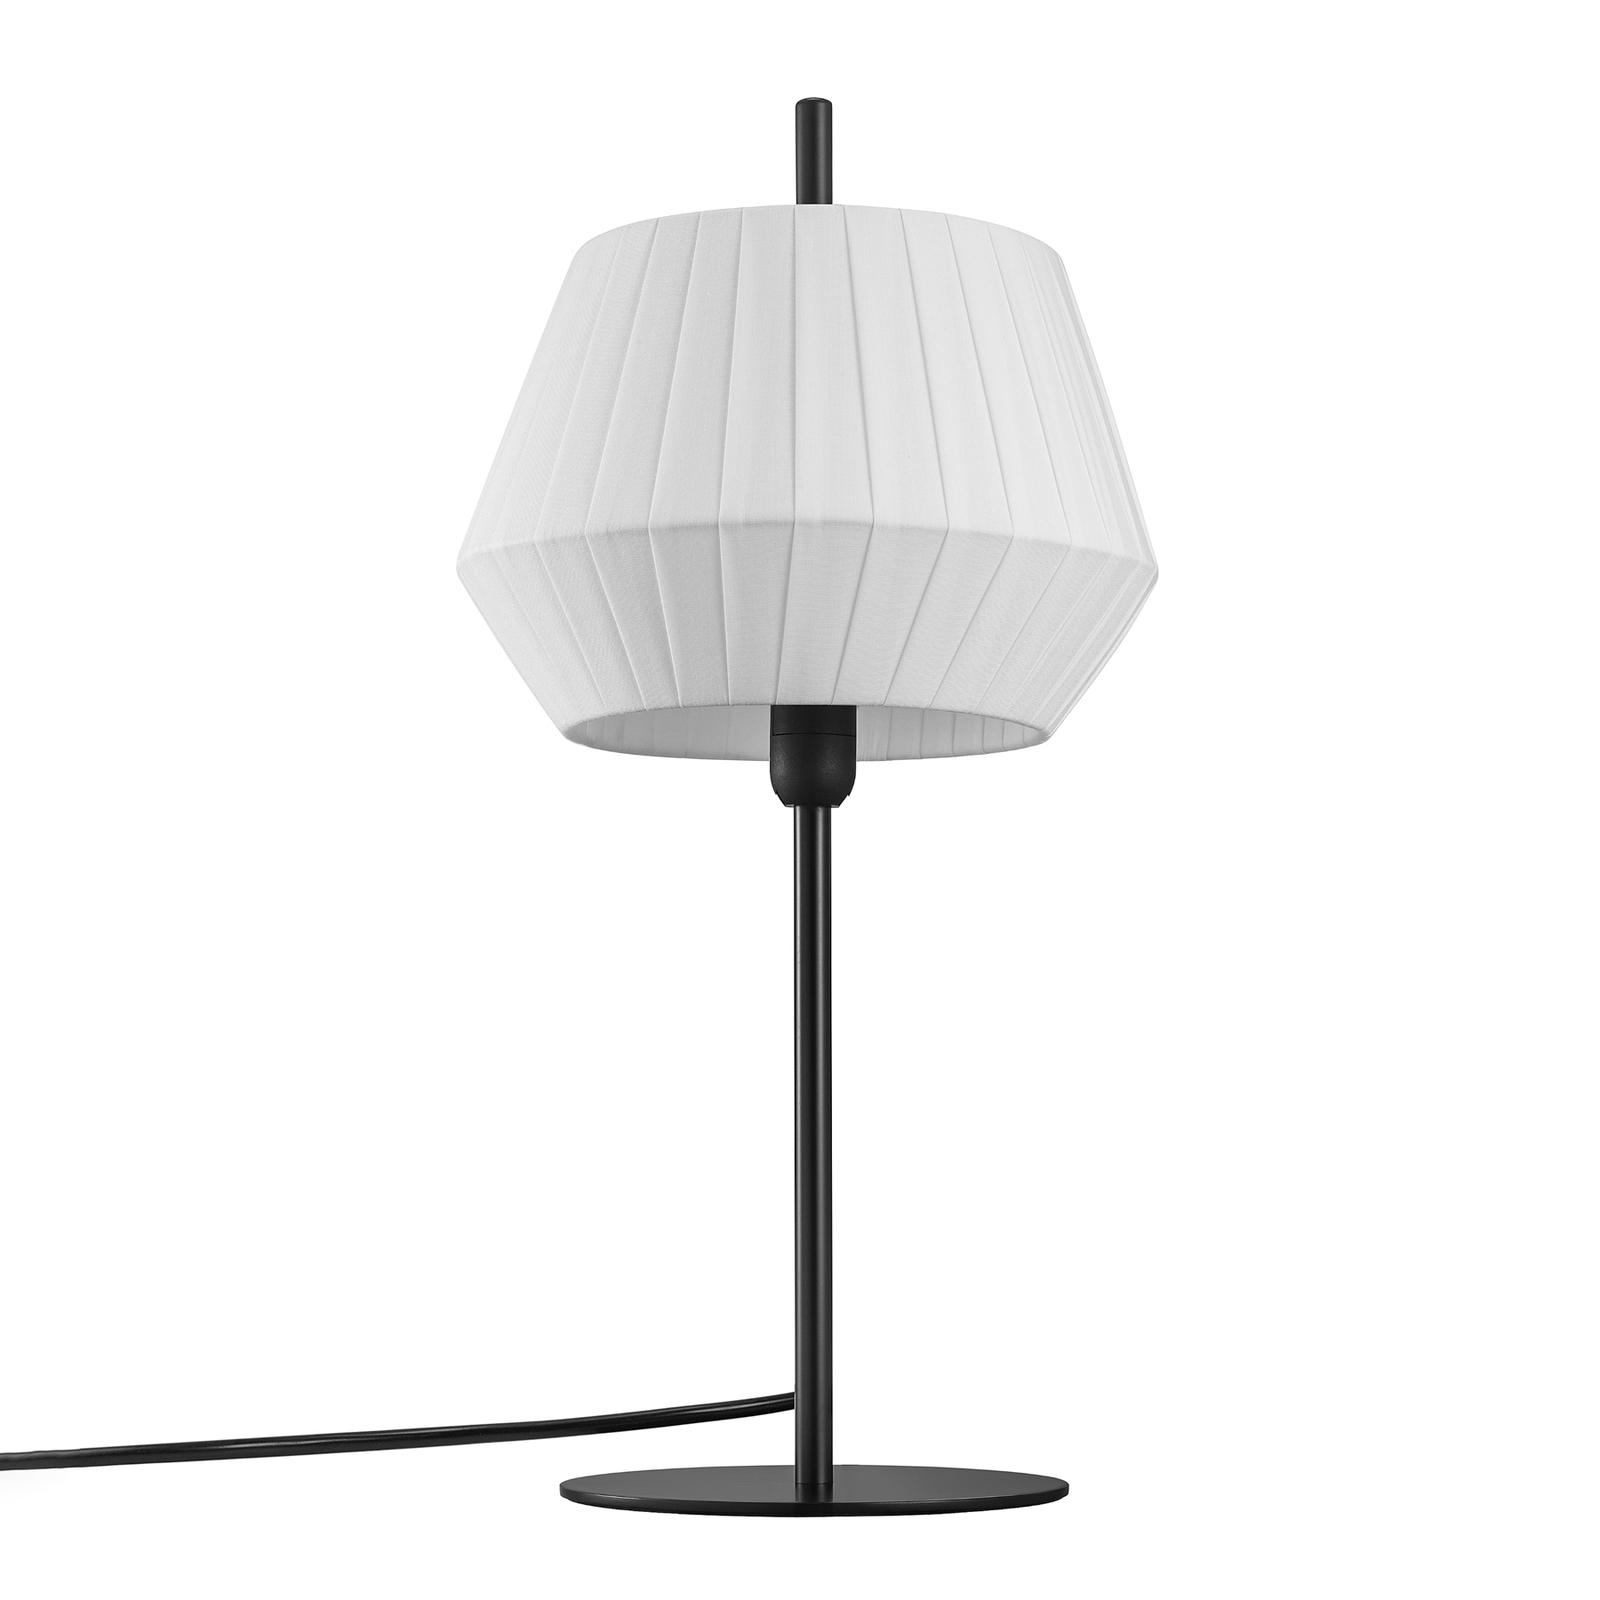 Dicte table lamp, hand-bound lampshade, white